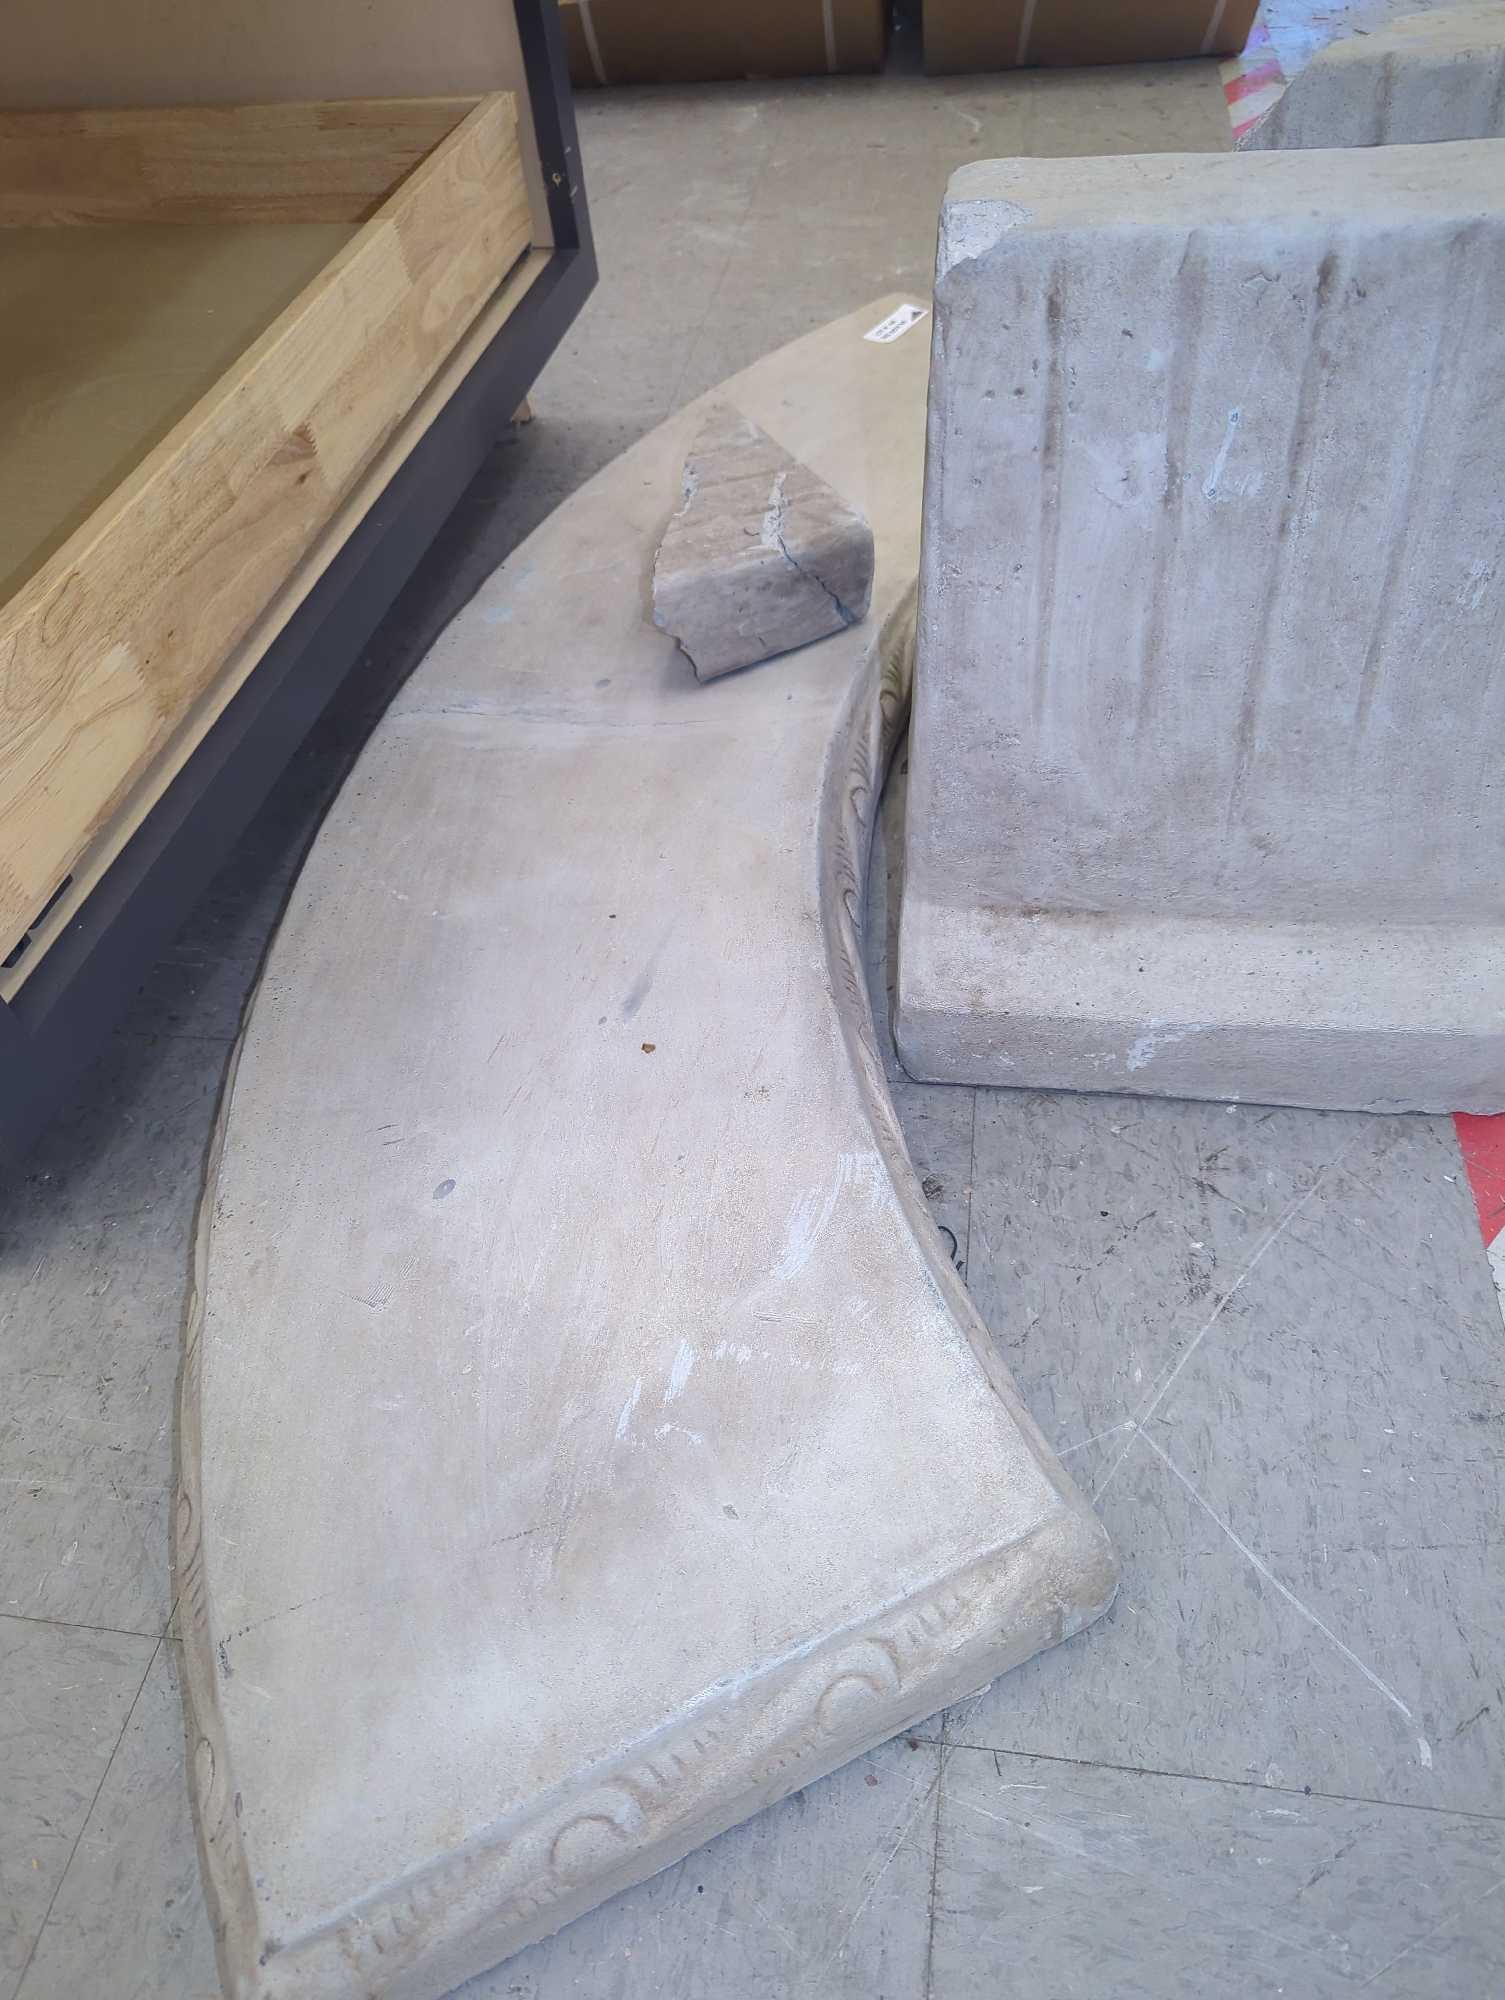 Old World Concrete Curved Garden Bench, 1 Bench Leg Needs Repaired as it was Broken during Shipment